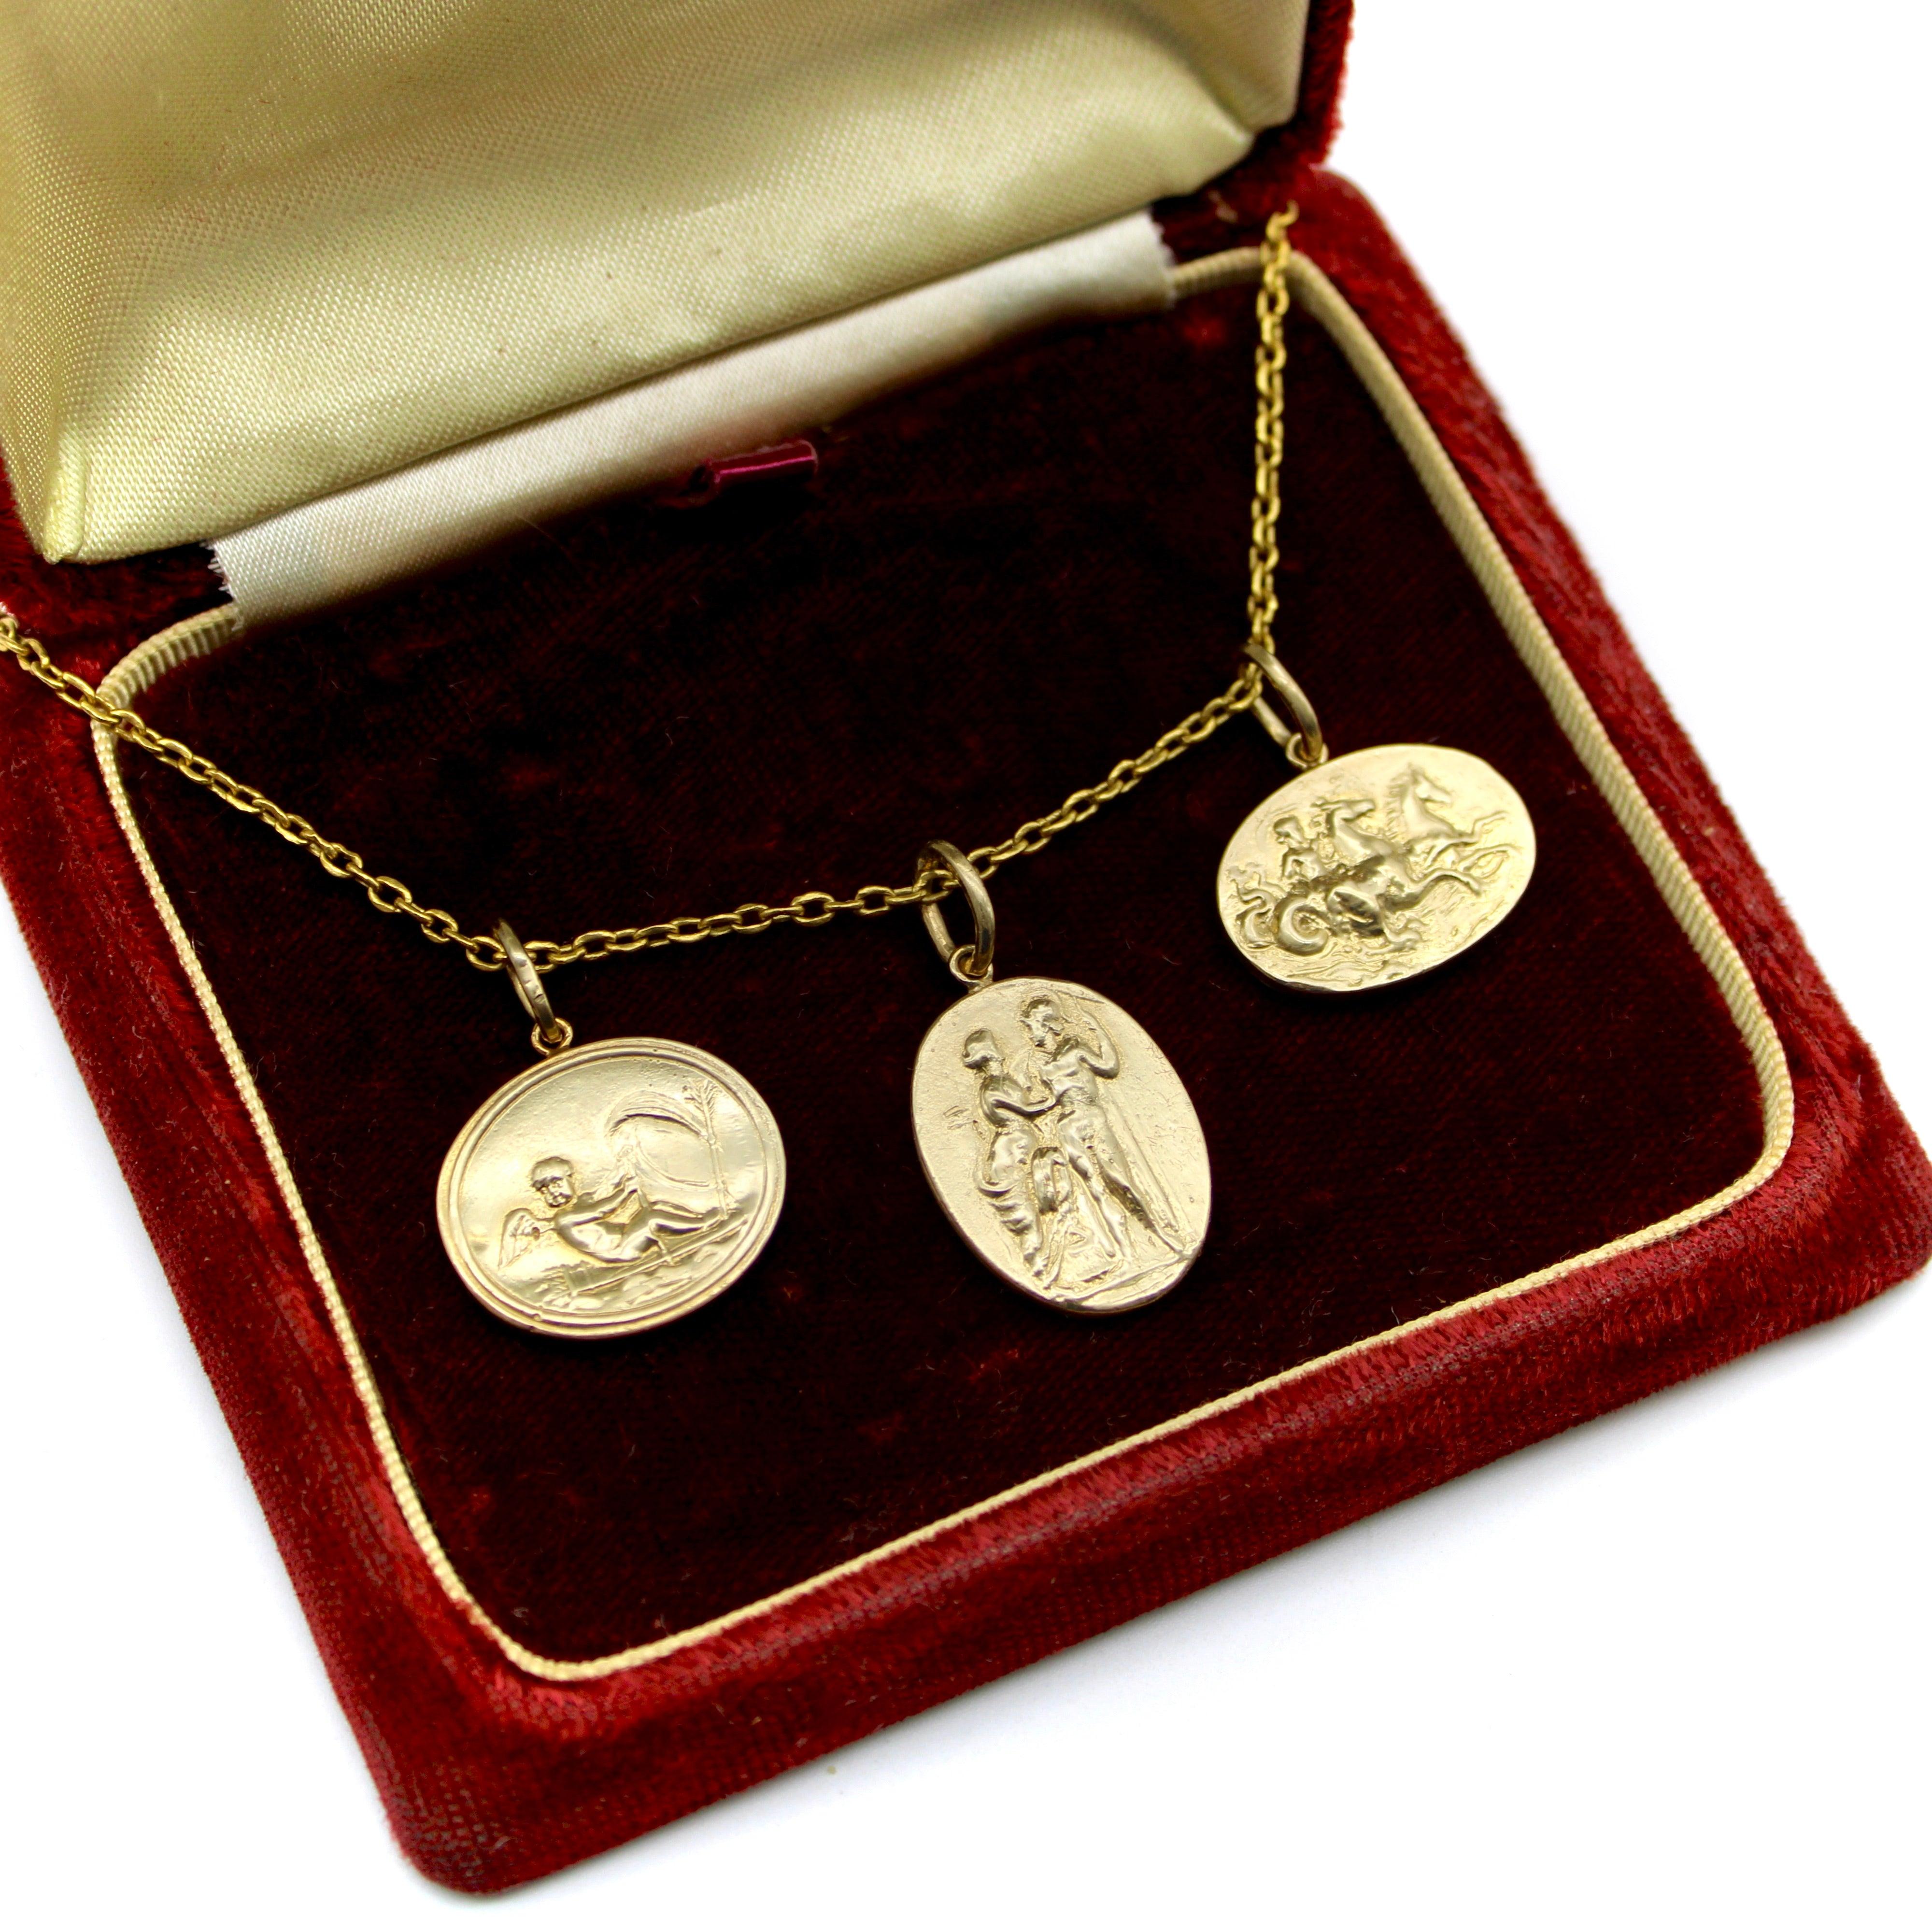 14K Gold Signature Classical Revival Venus and Mars Medallion For Sale 1